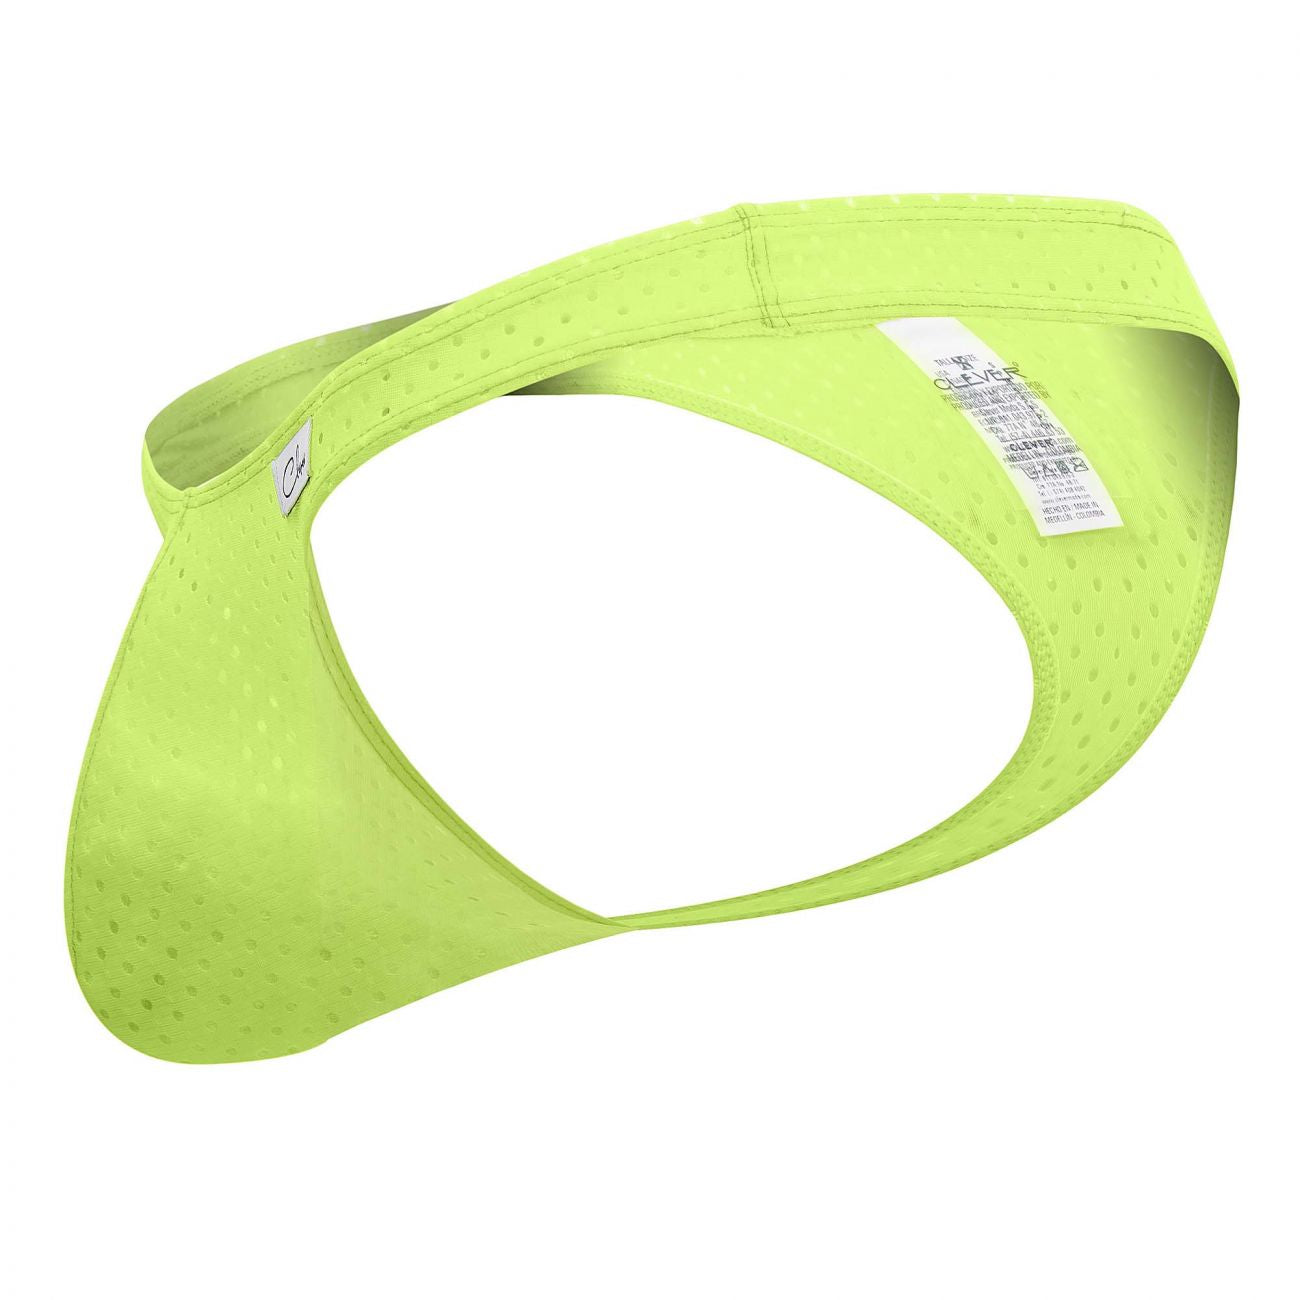 Clever 0930 Solar Thongs Lime Green